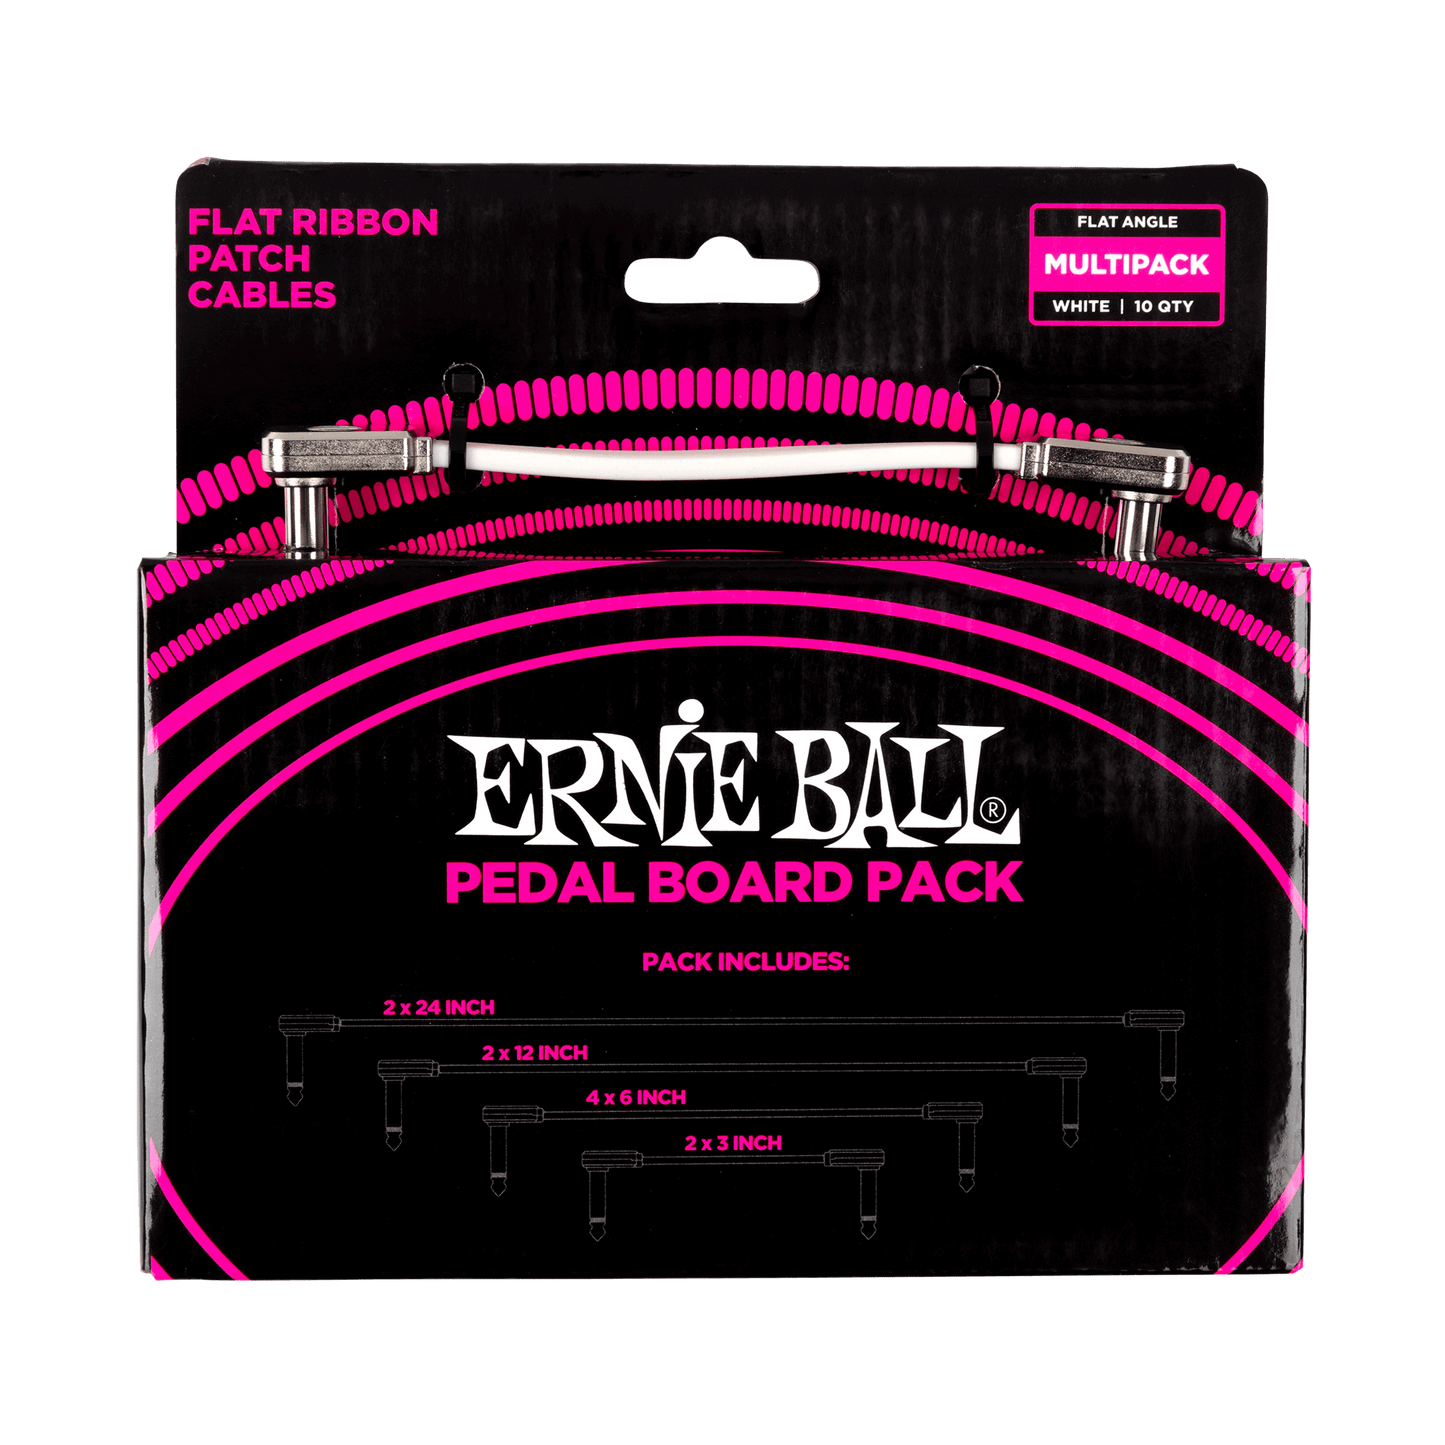 Ernie Ball Flat Ribbon Patch Cables